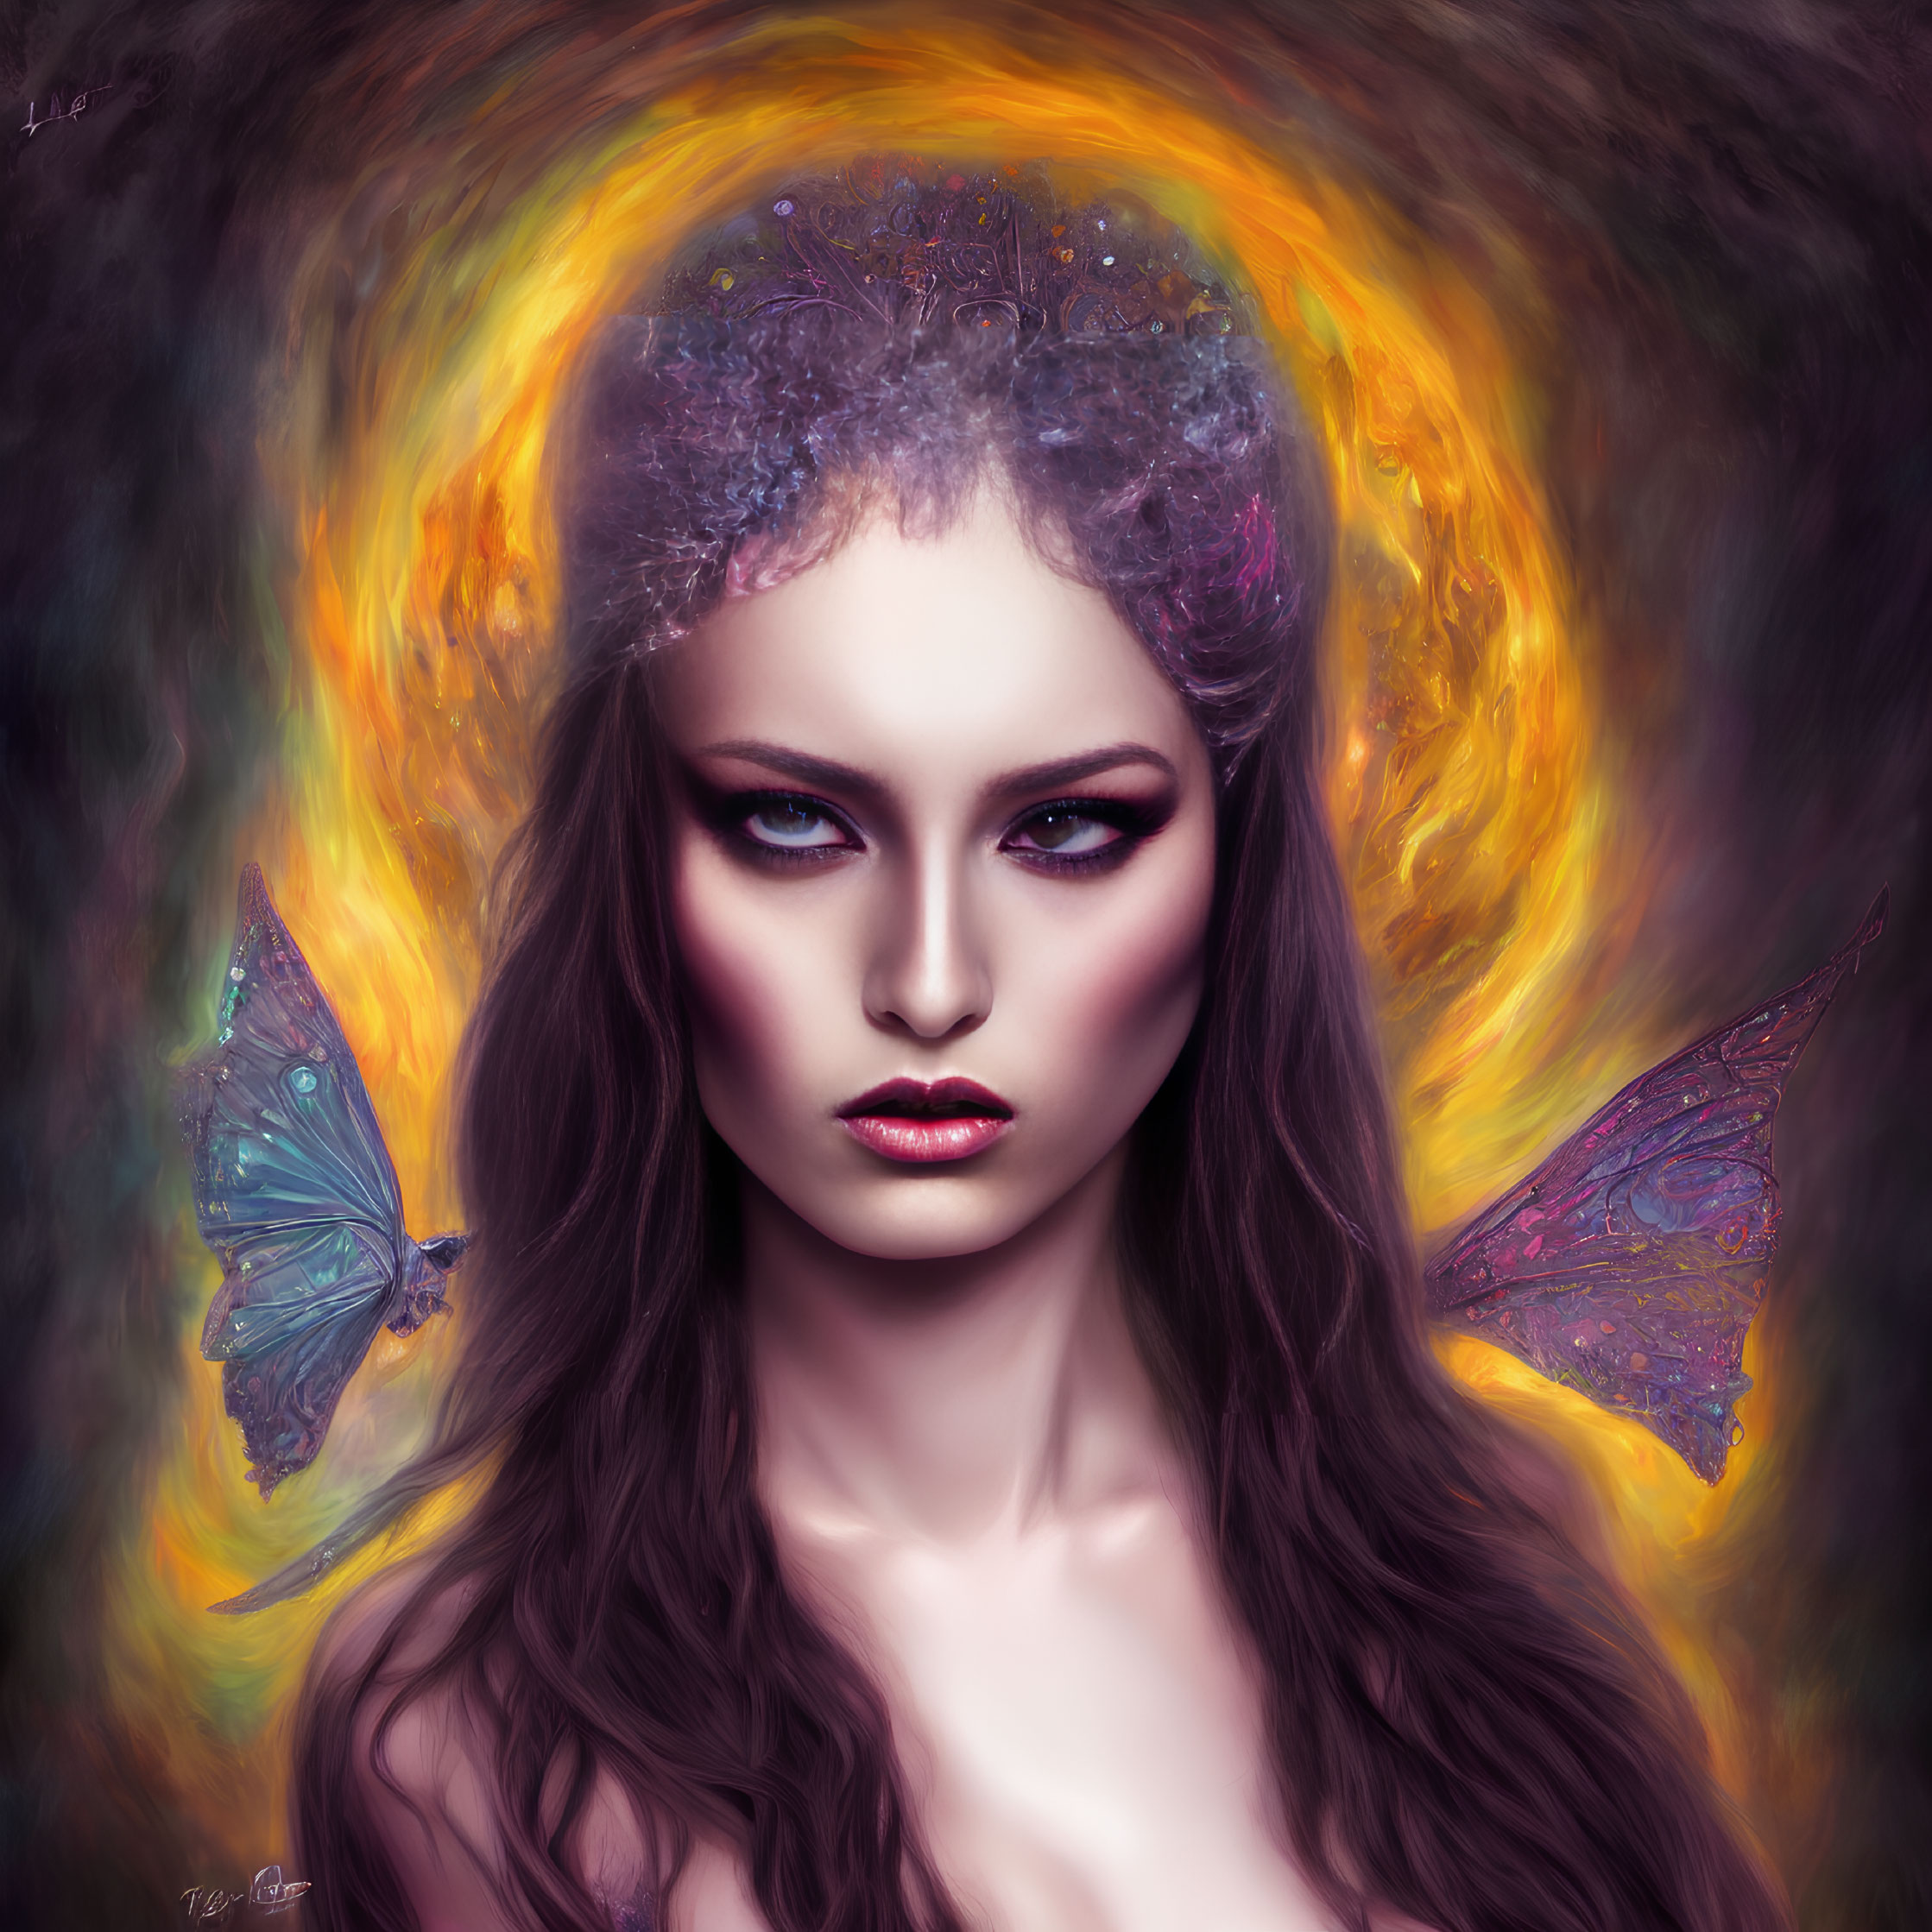 Digital portrait of a woman with butterfly wings for ears and intense eyes on fiery abstract background